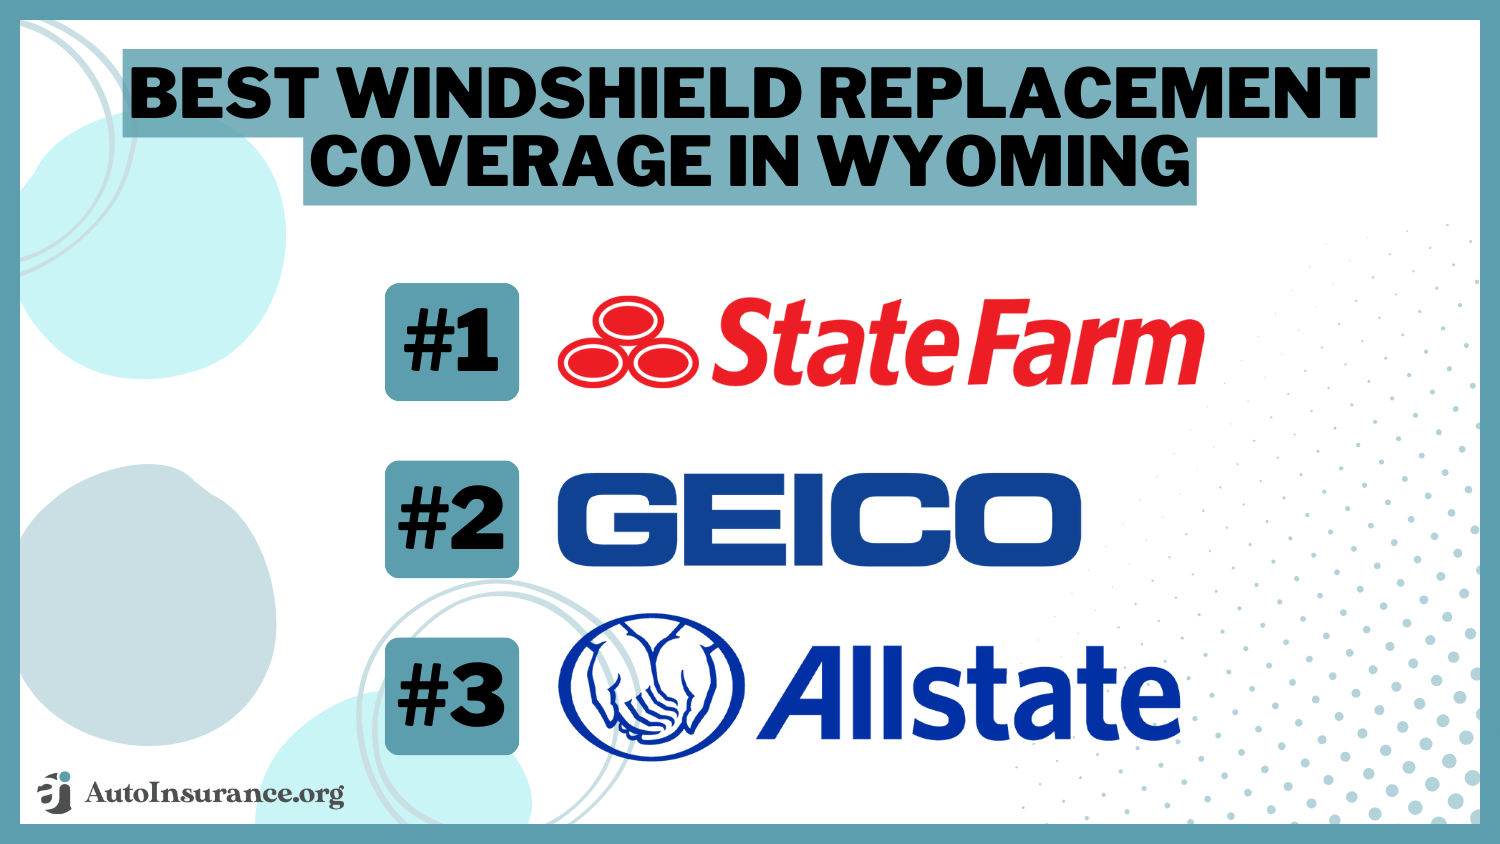 Best Windshield Replacement Coverage in Wyoming: State Farm, Geico, and Allstate